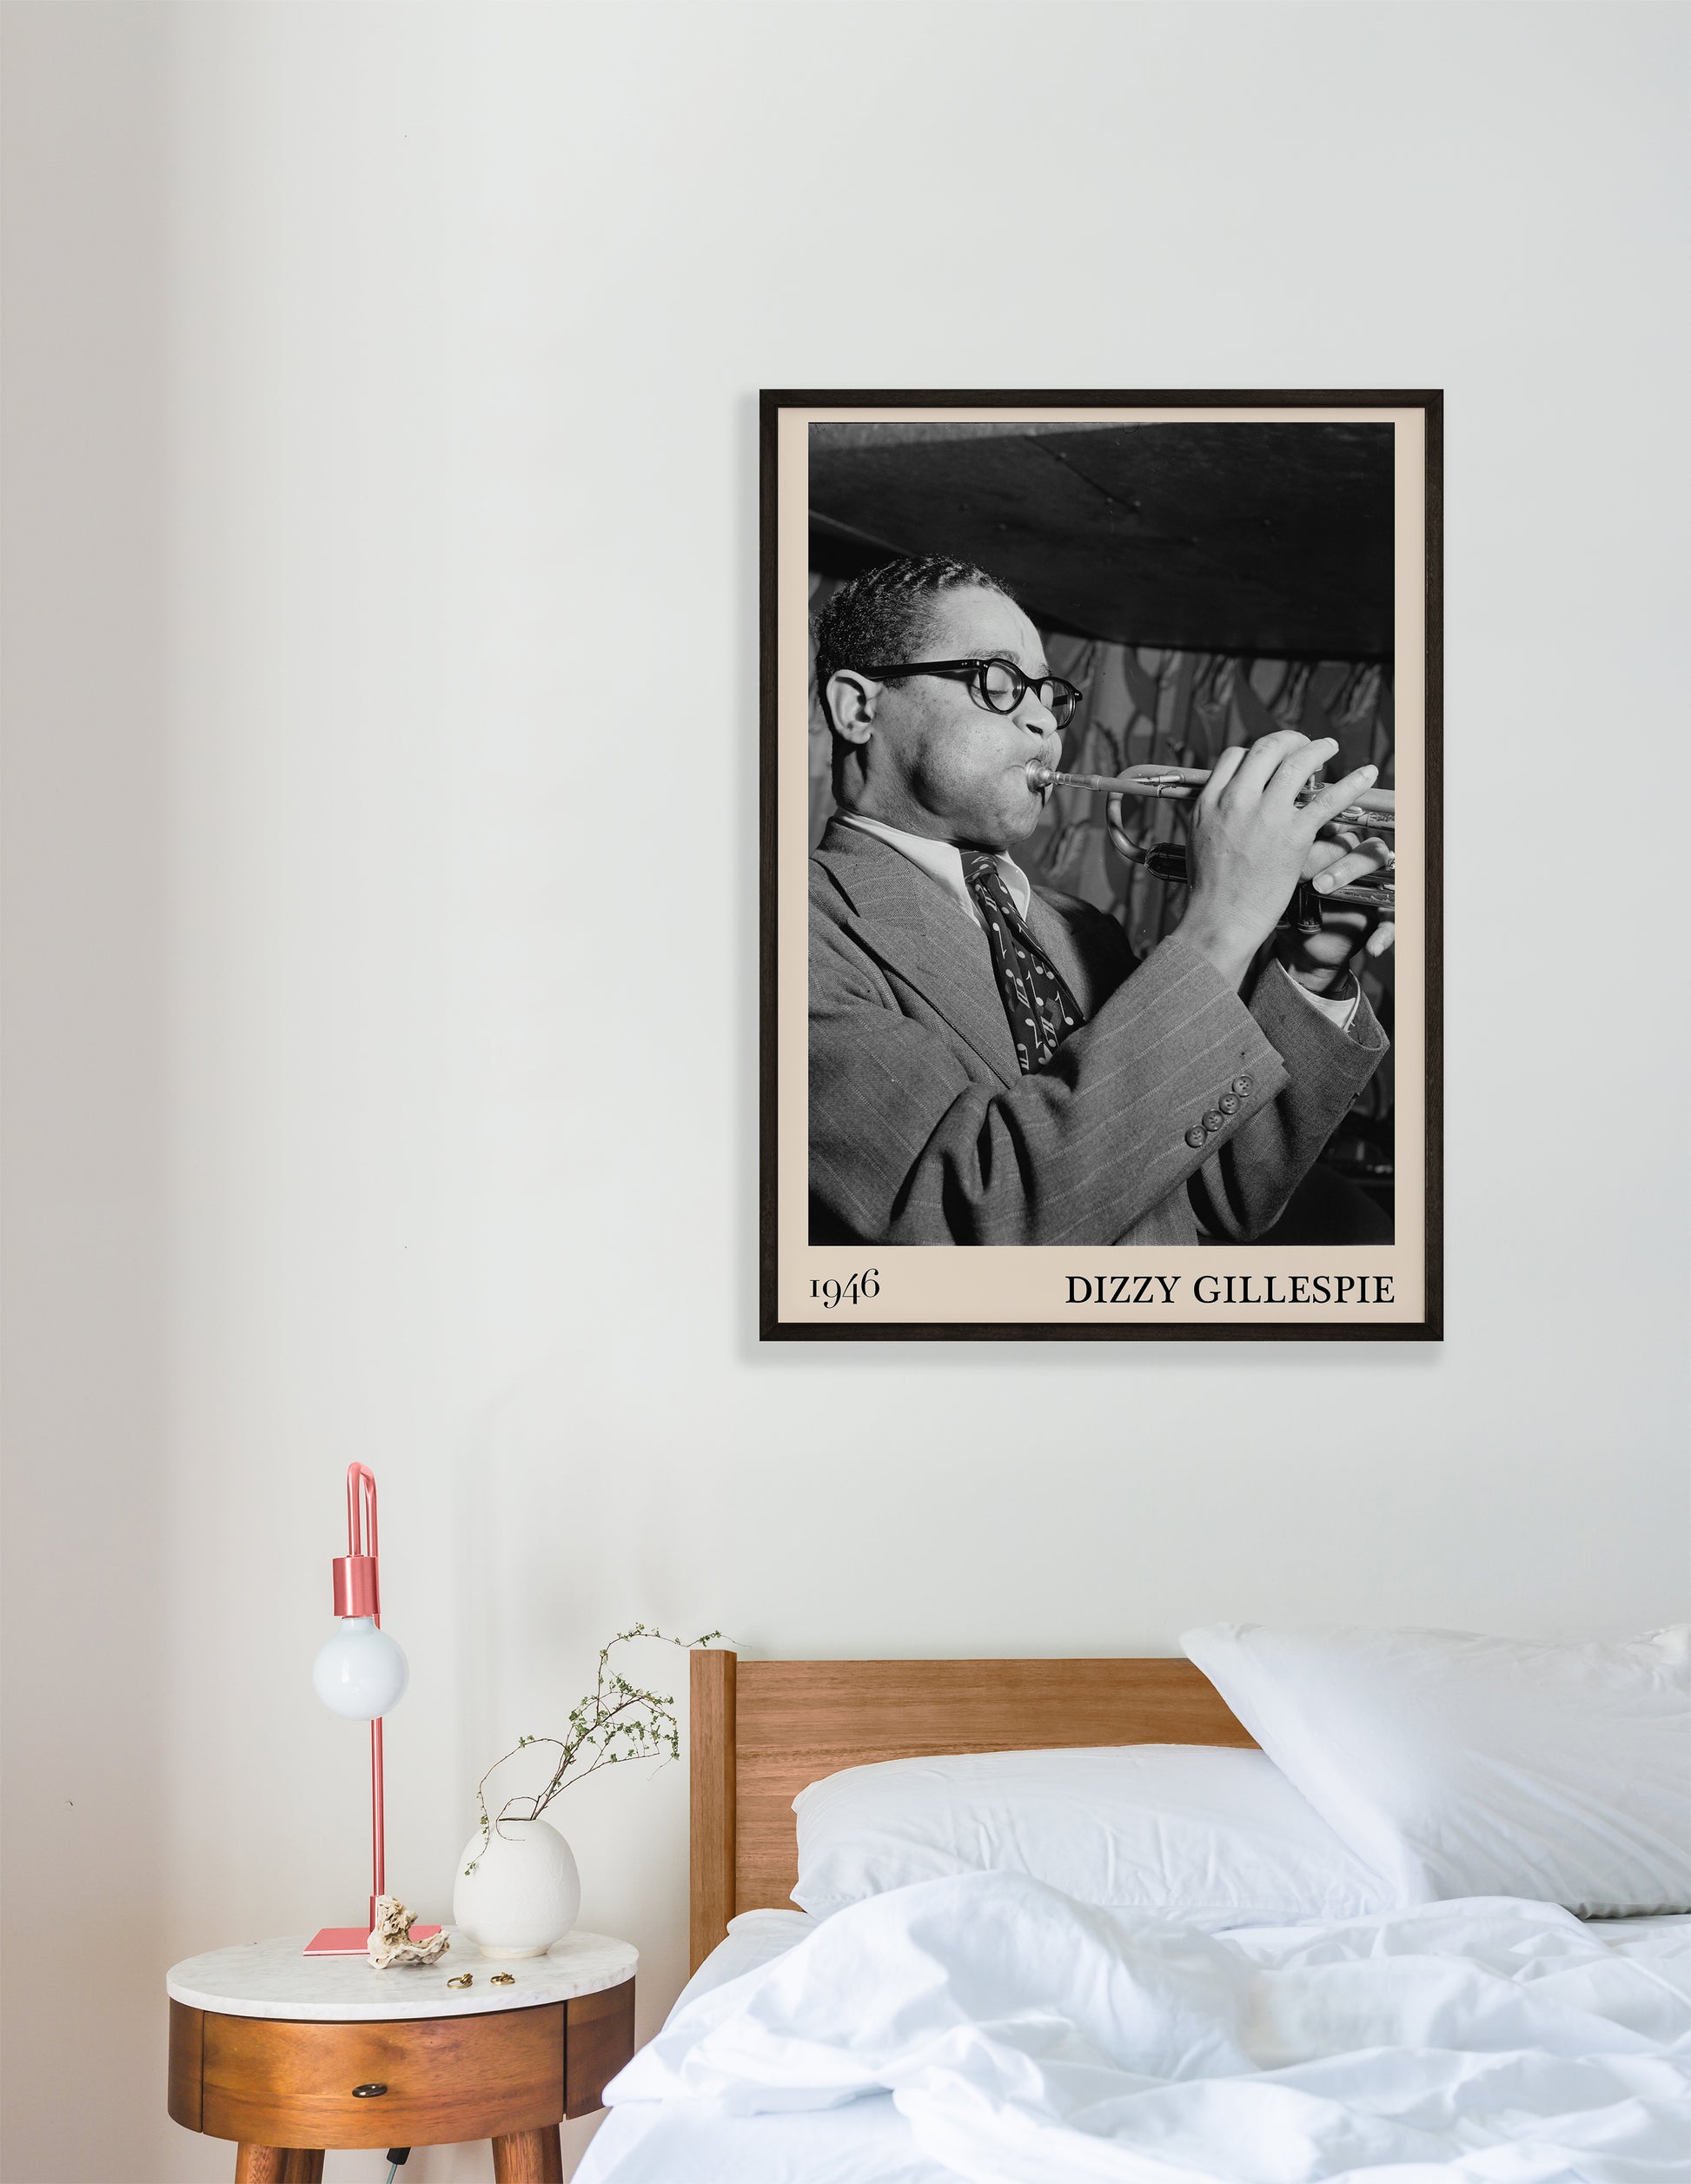 Cool 1946 photo of Dizzy Gillespie crafted into black framed print, hanging on a bedroom wall